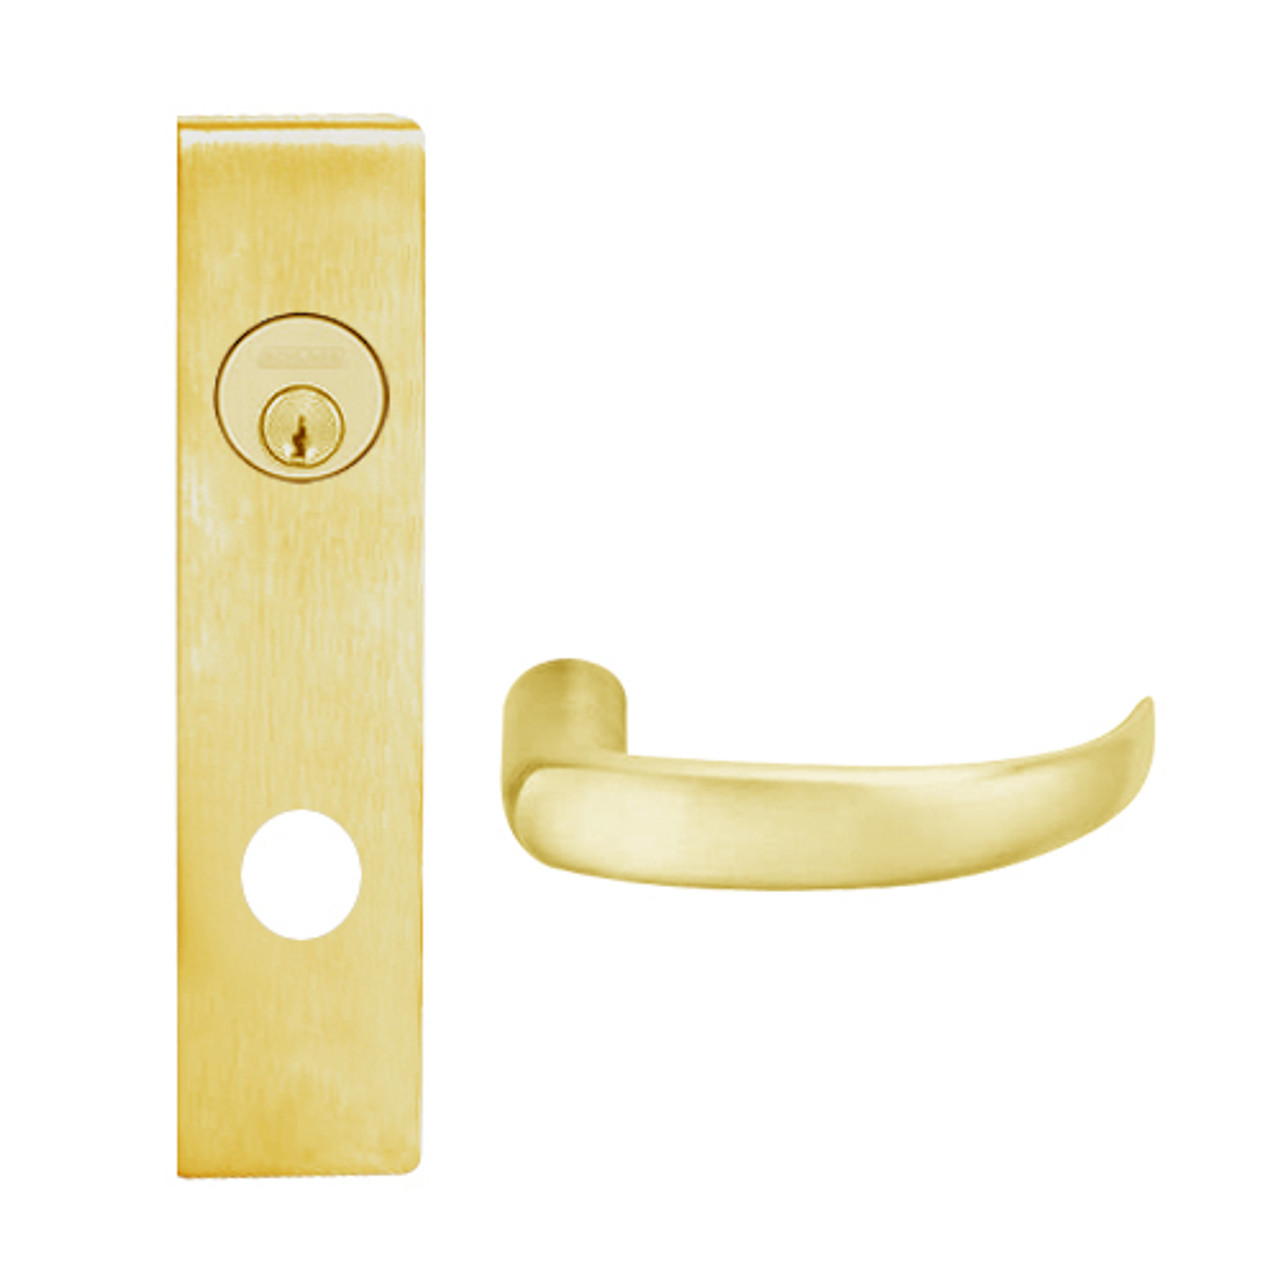 L9070P-17L-605 Schlage L Series Classroom Commercial Mortise Lock with 17 Cast Lever Design in Bright Brass